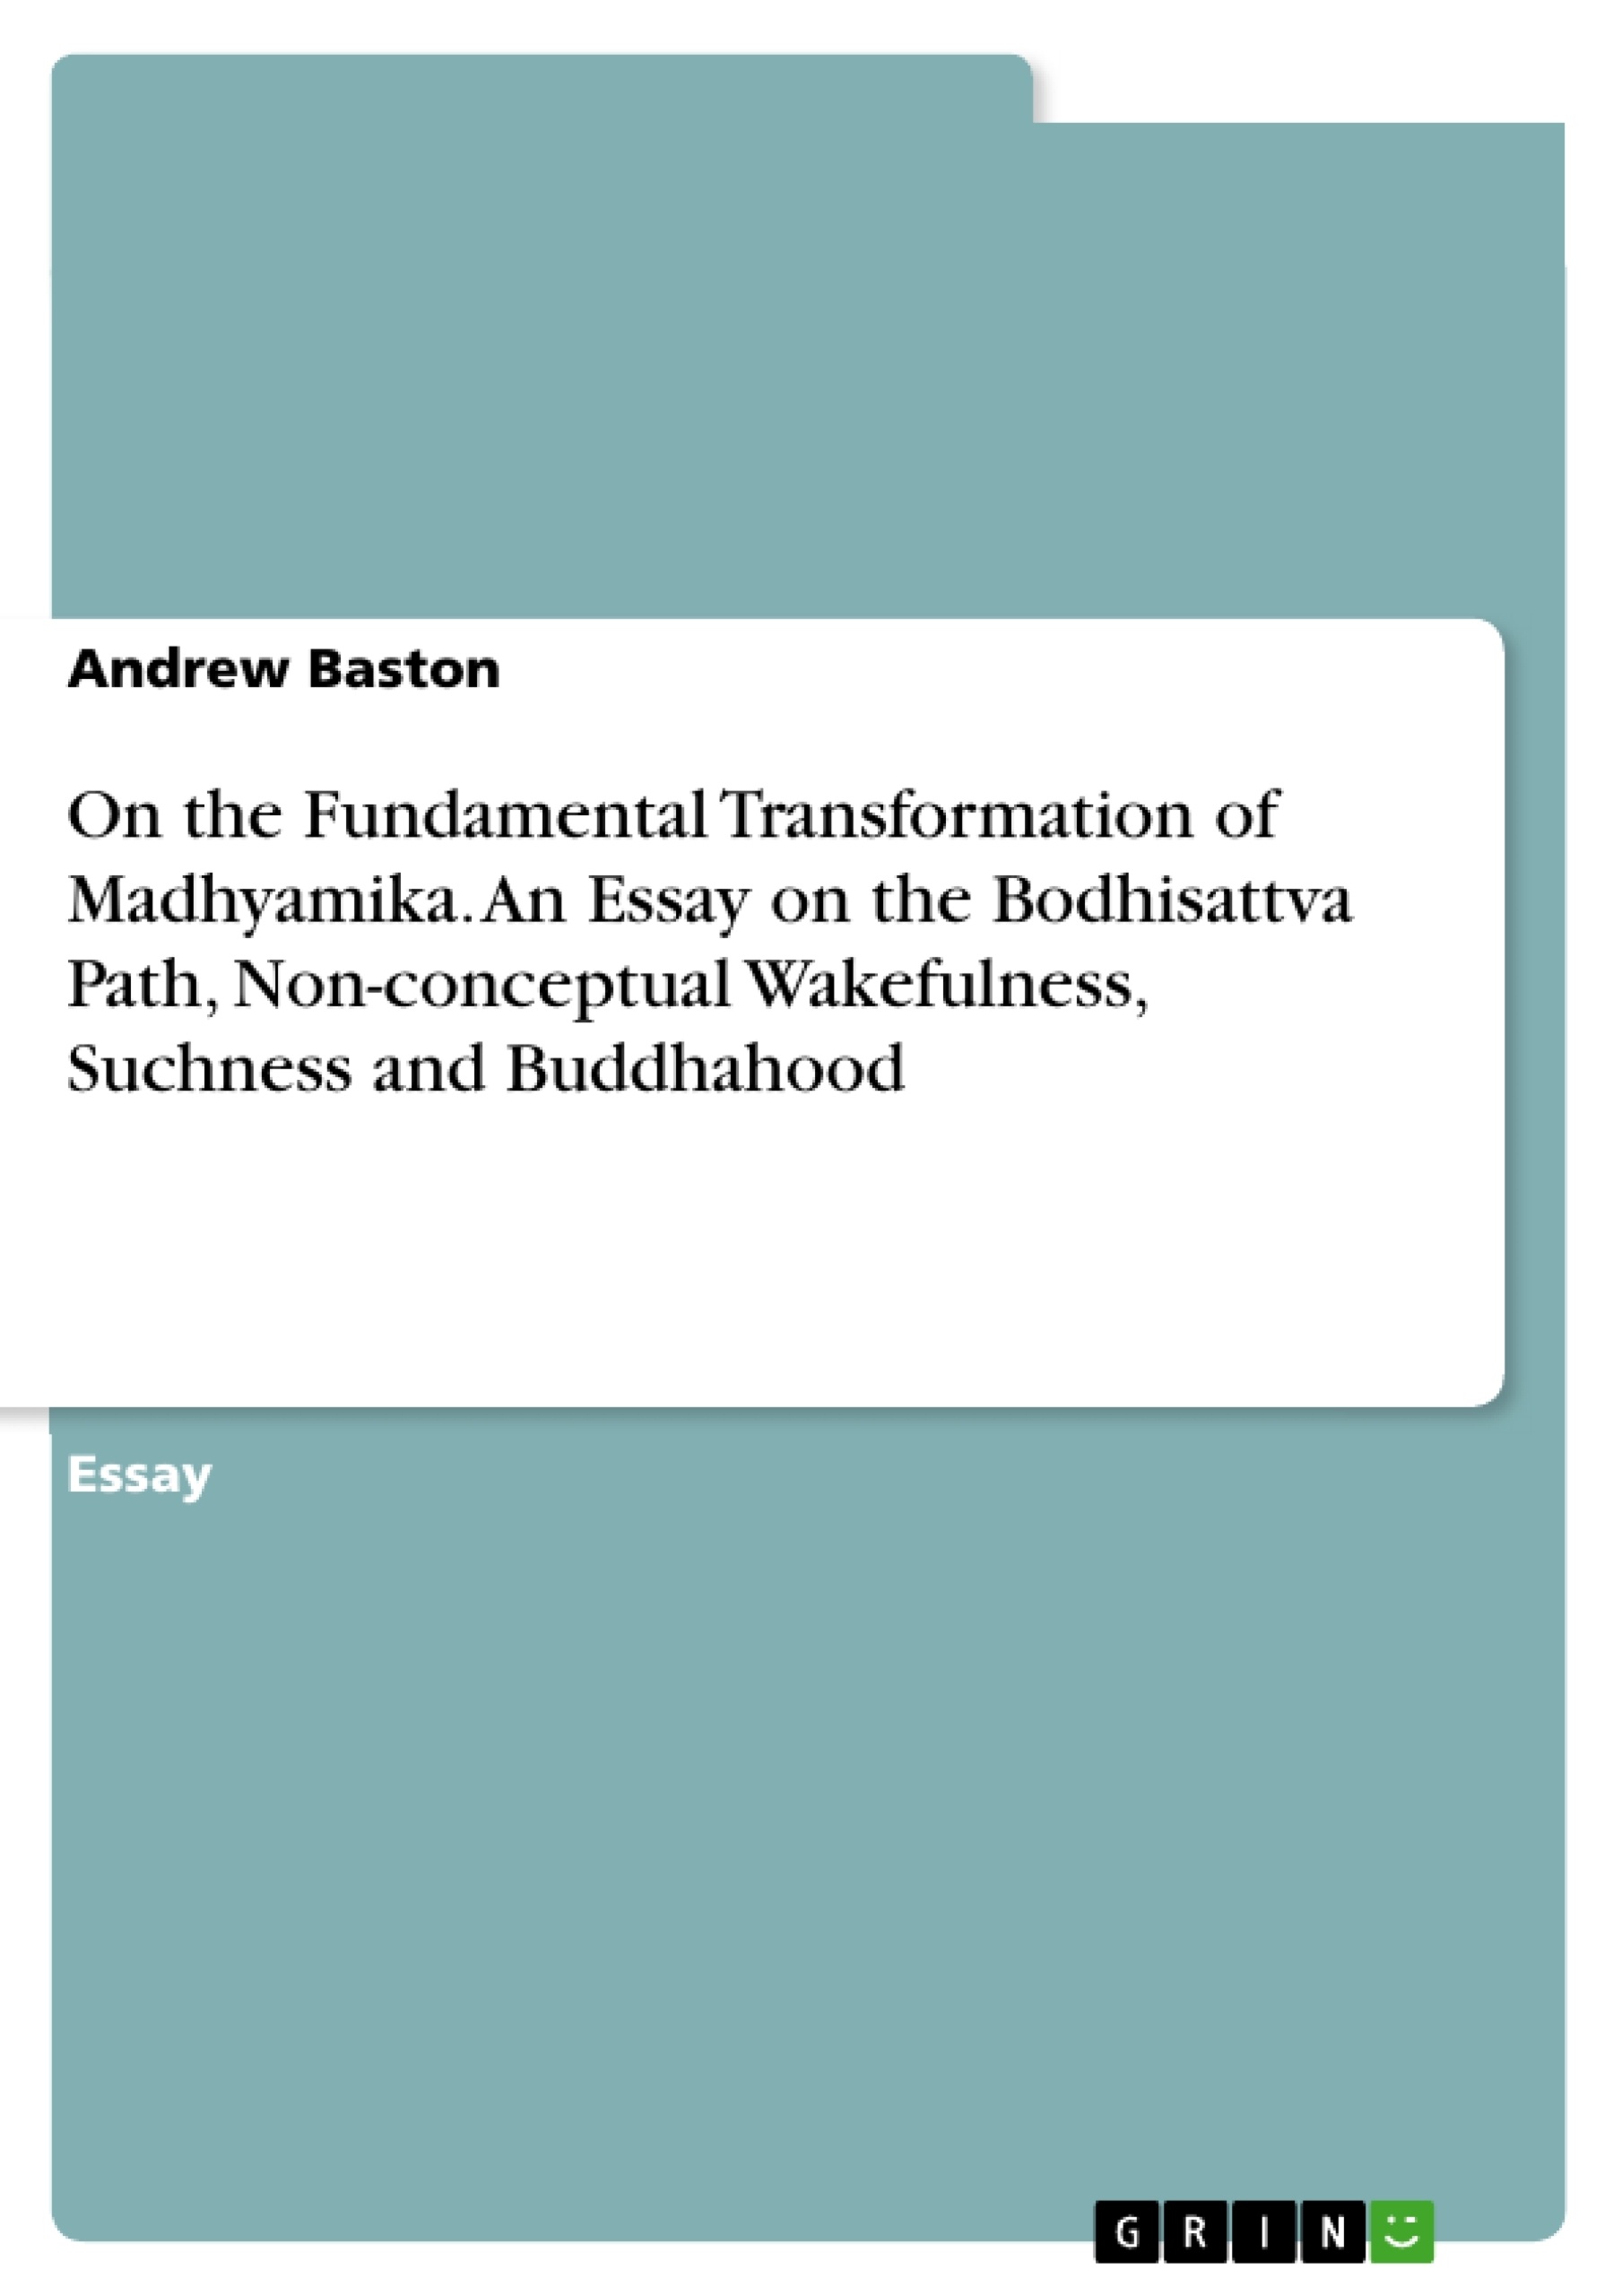 Title: On the Fundamental Transformation of Madhyamika. An Essay on the Bodhisattva Path, Non-conceptual Wakefulness, Suchness and Buddhahood